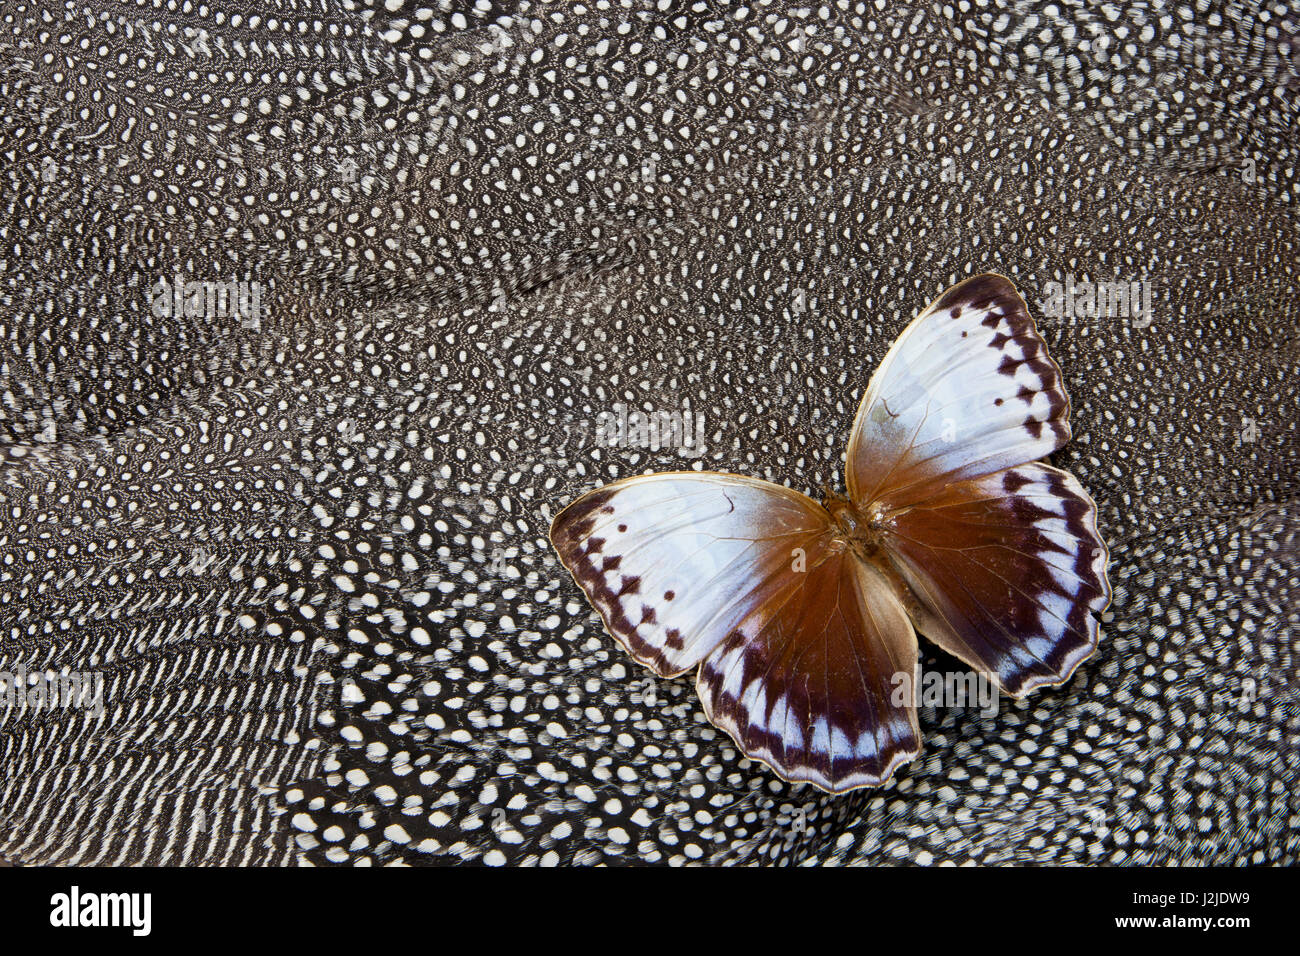 Jungle Queen Butterfly on Helmeted Guineafowl Stock Photo